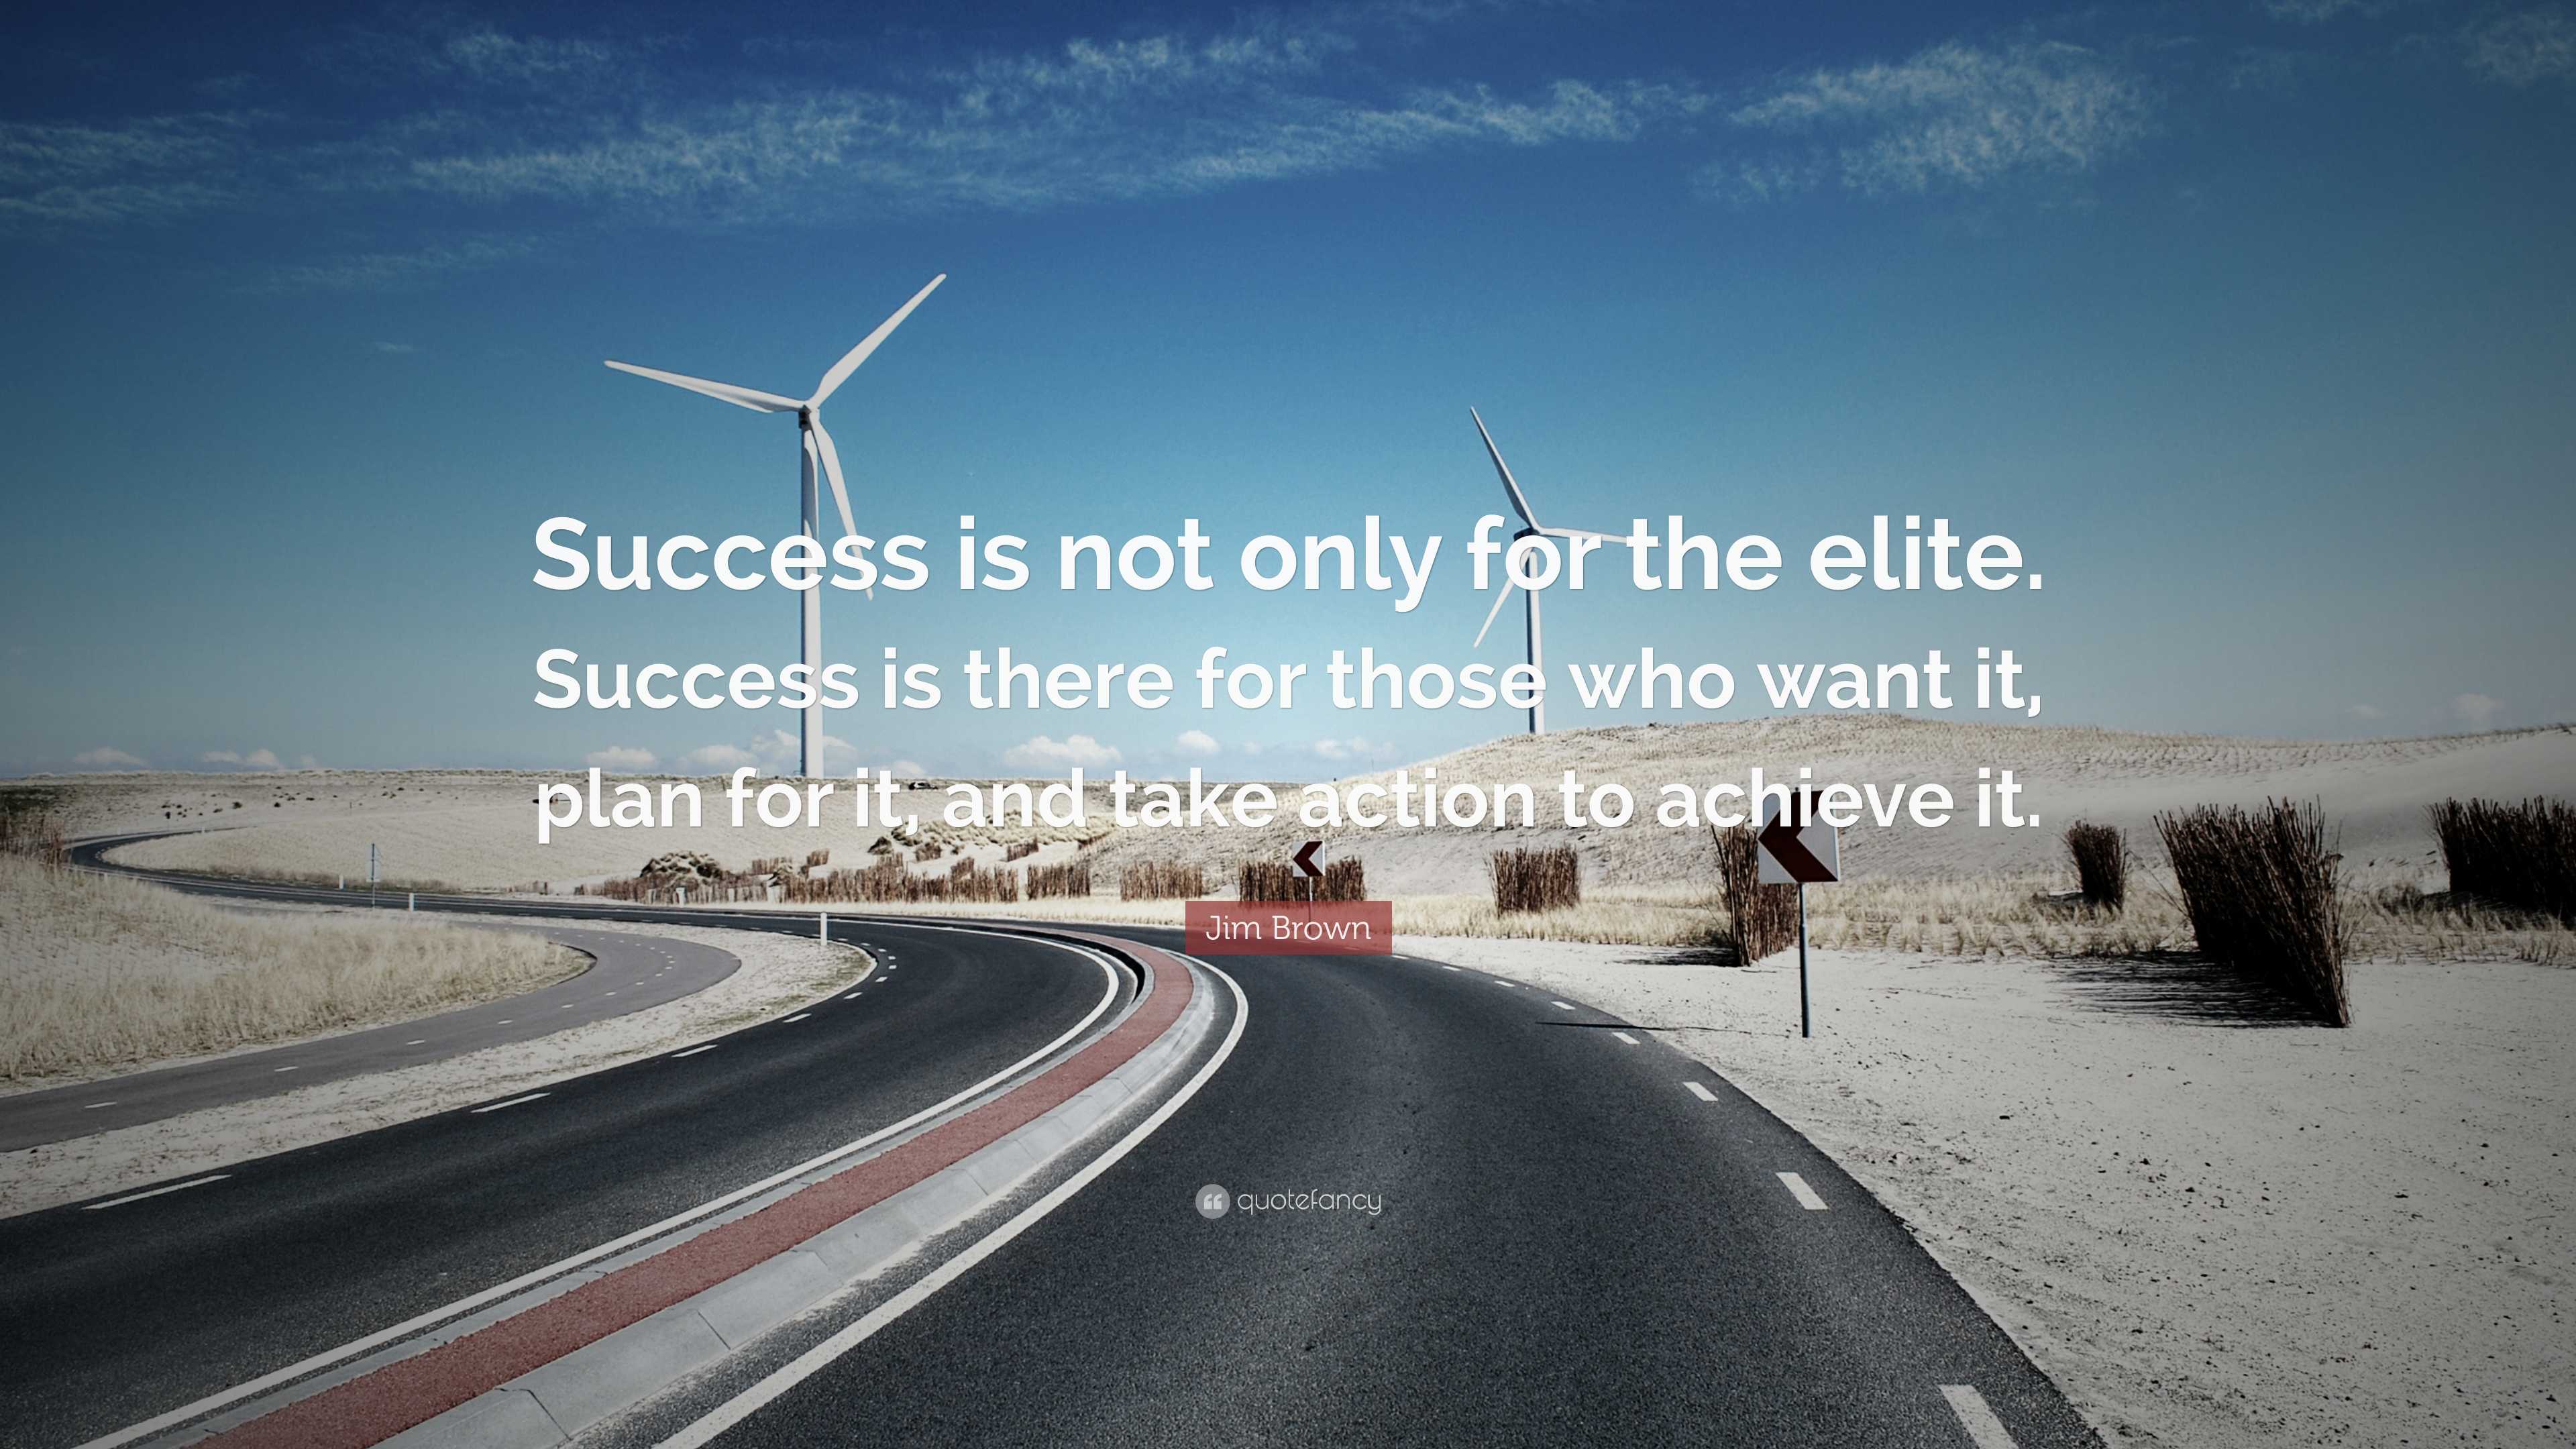 Jim Brown Quote: “Success is not only for the elite. Success is